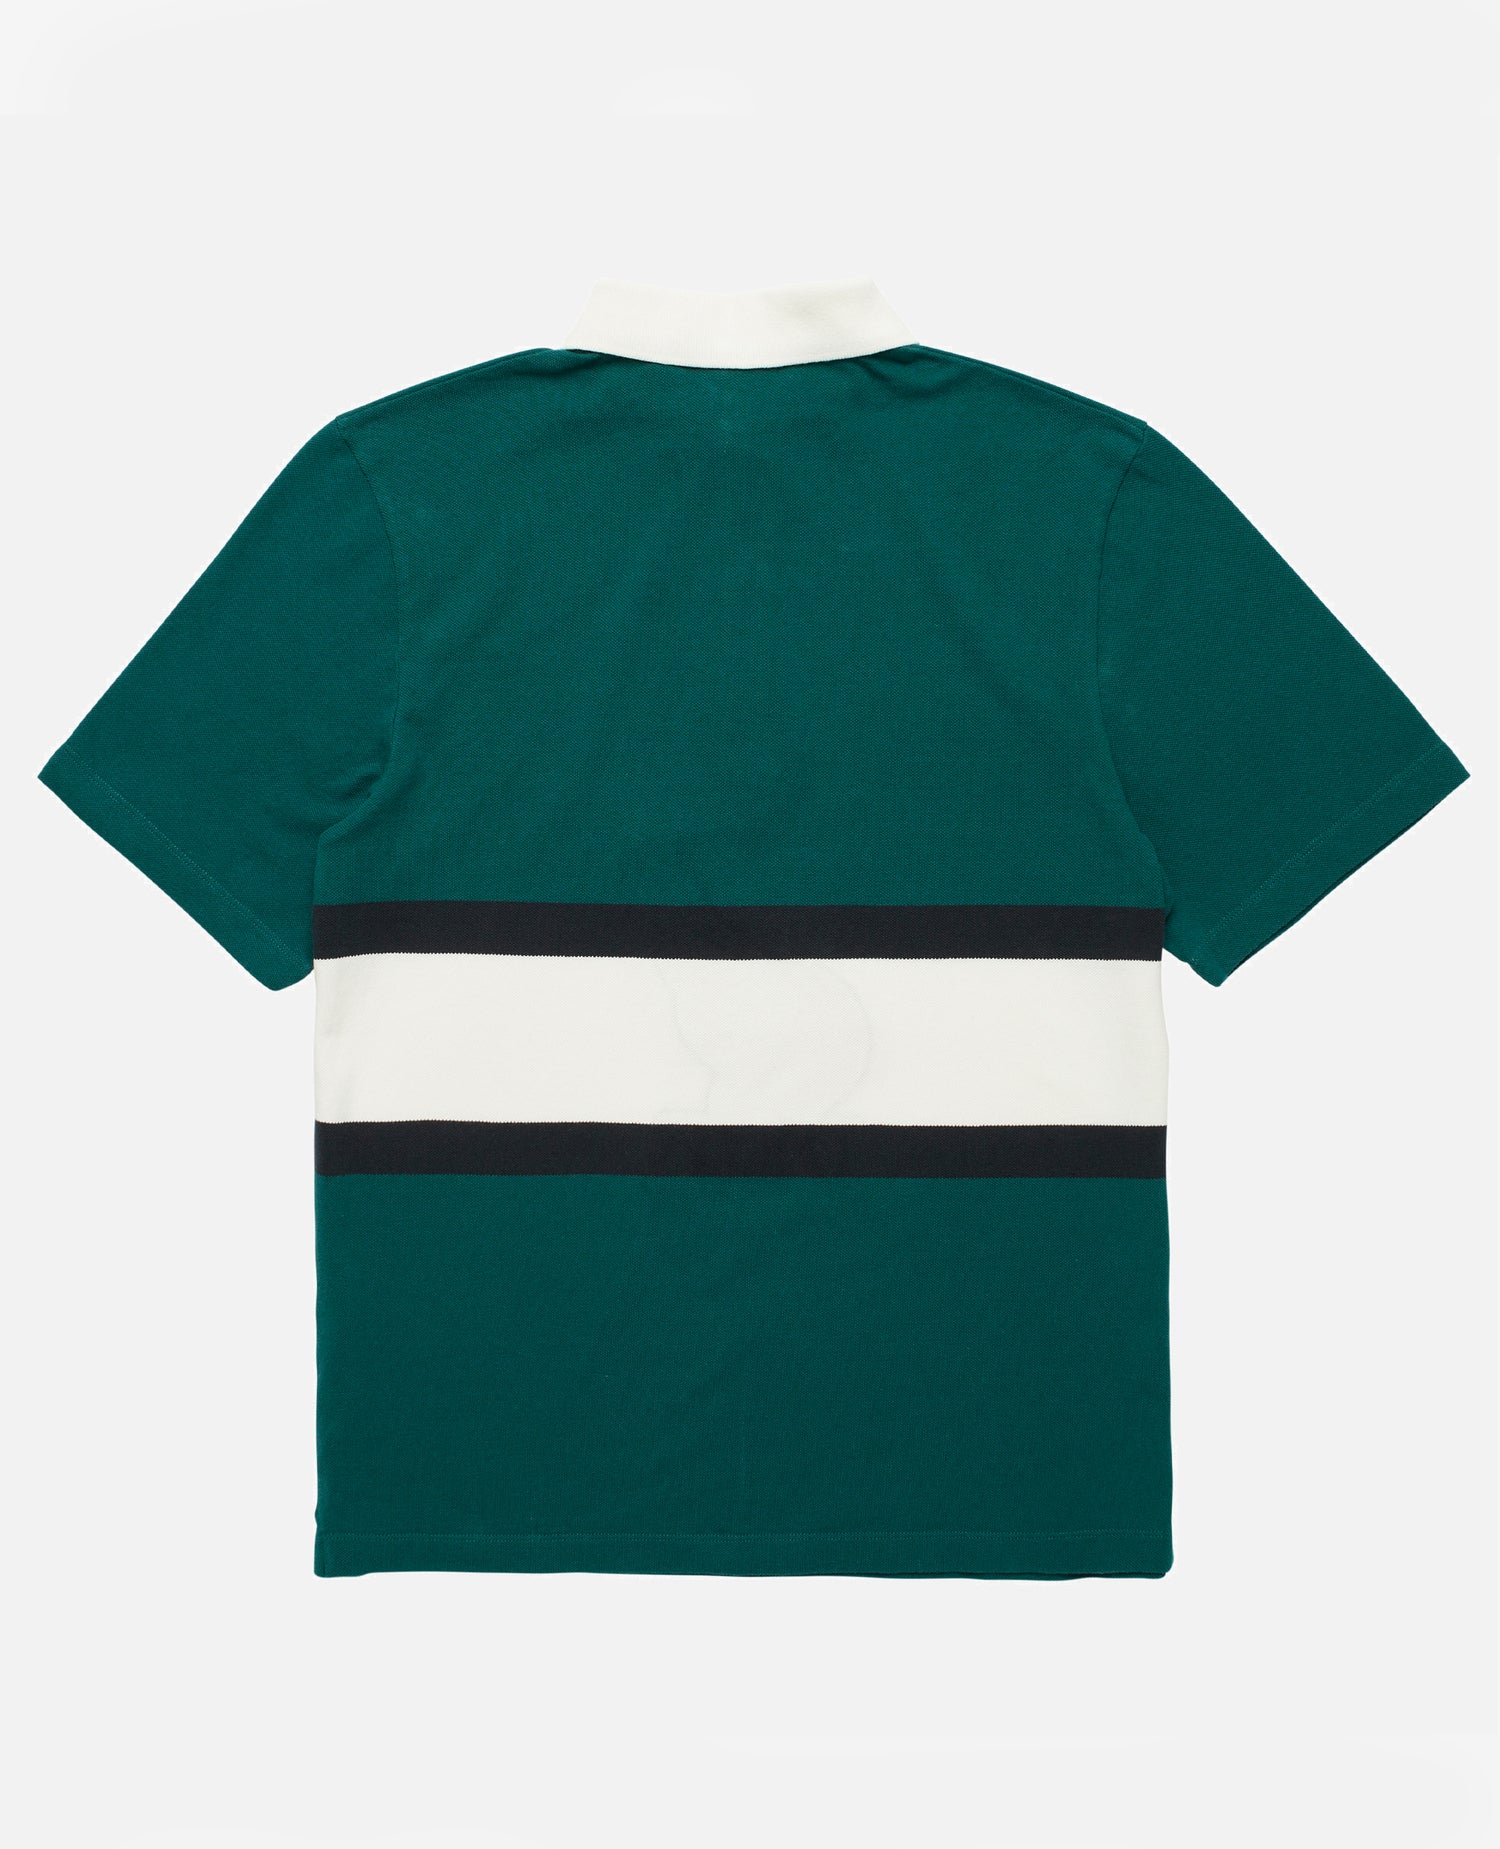 byParra Winged Logo Polo Shirt (Teal/Off White)